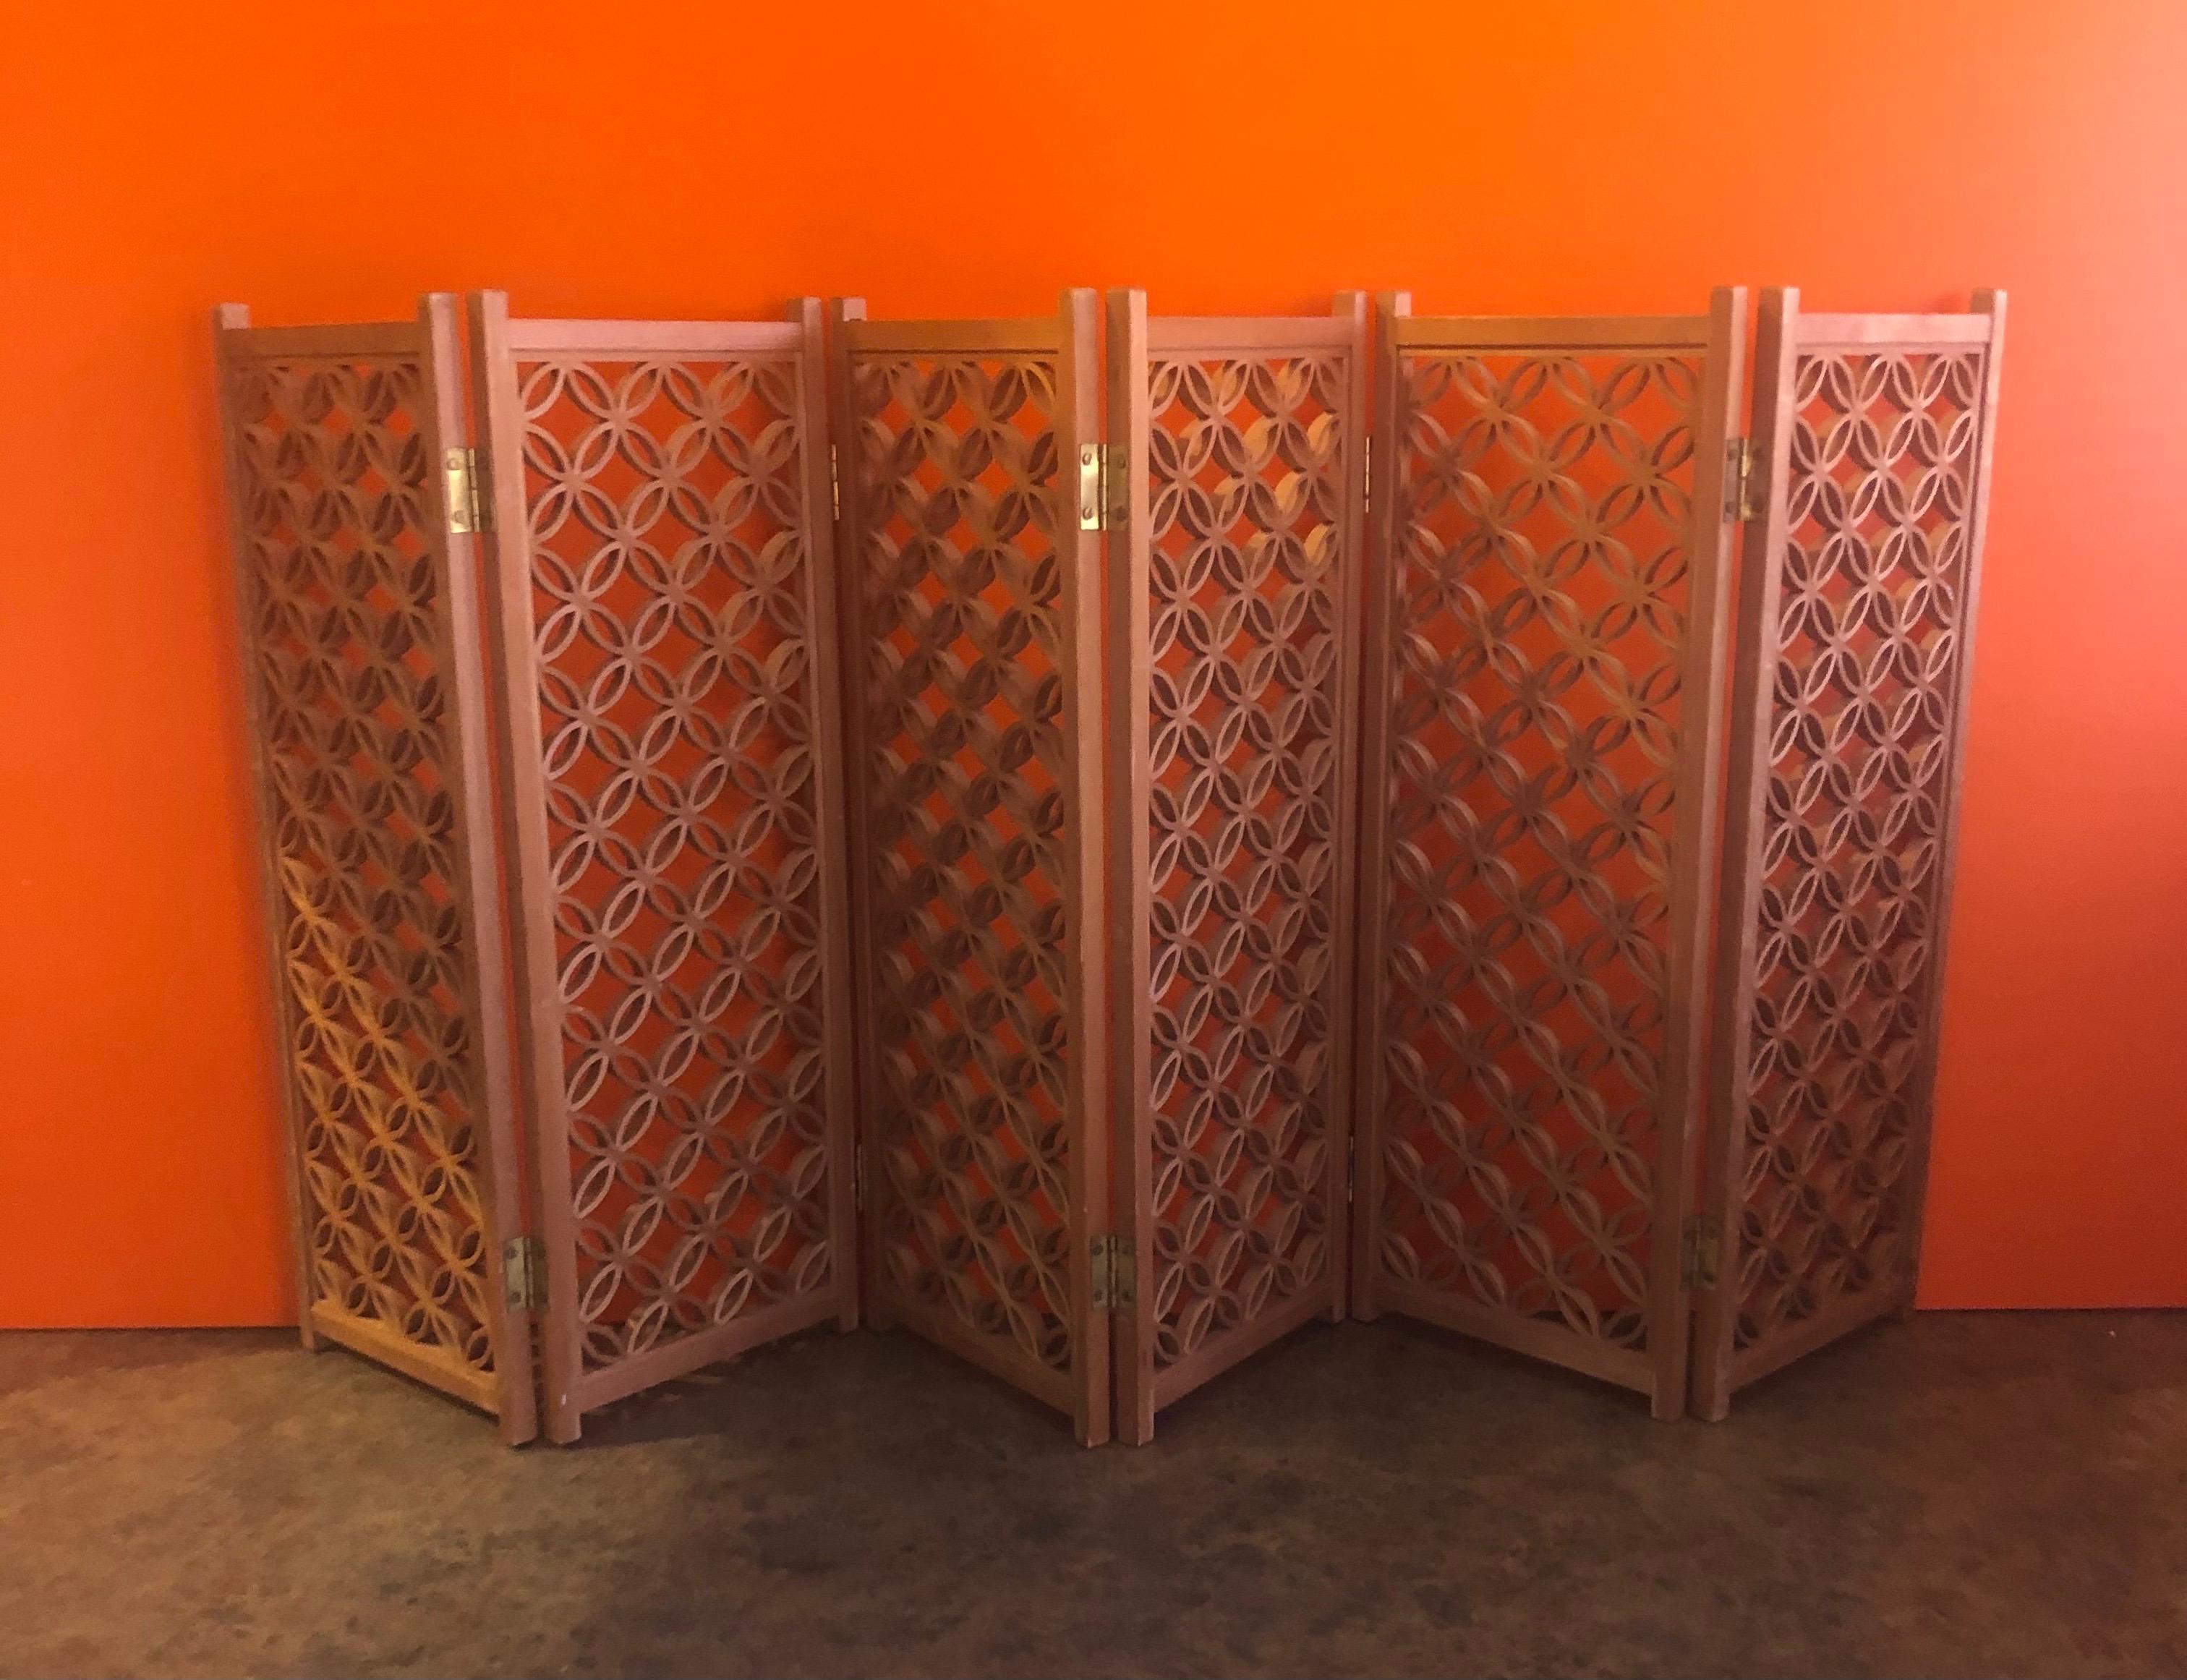 A very cool miniature six panel folding screen with intricate circular design in wood, circa 1970s. Each individual panel measures 5